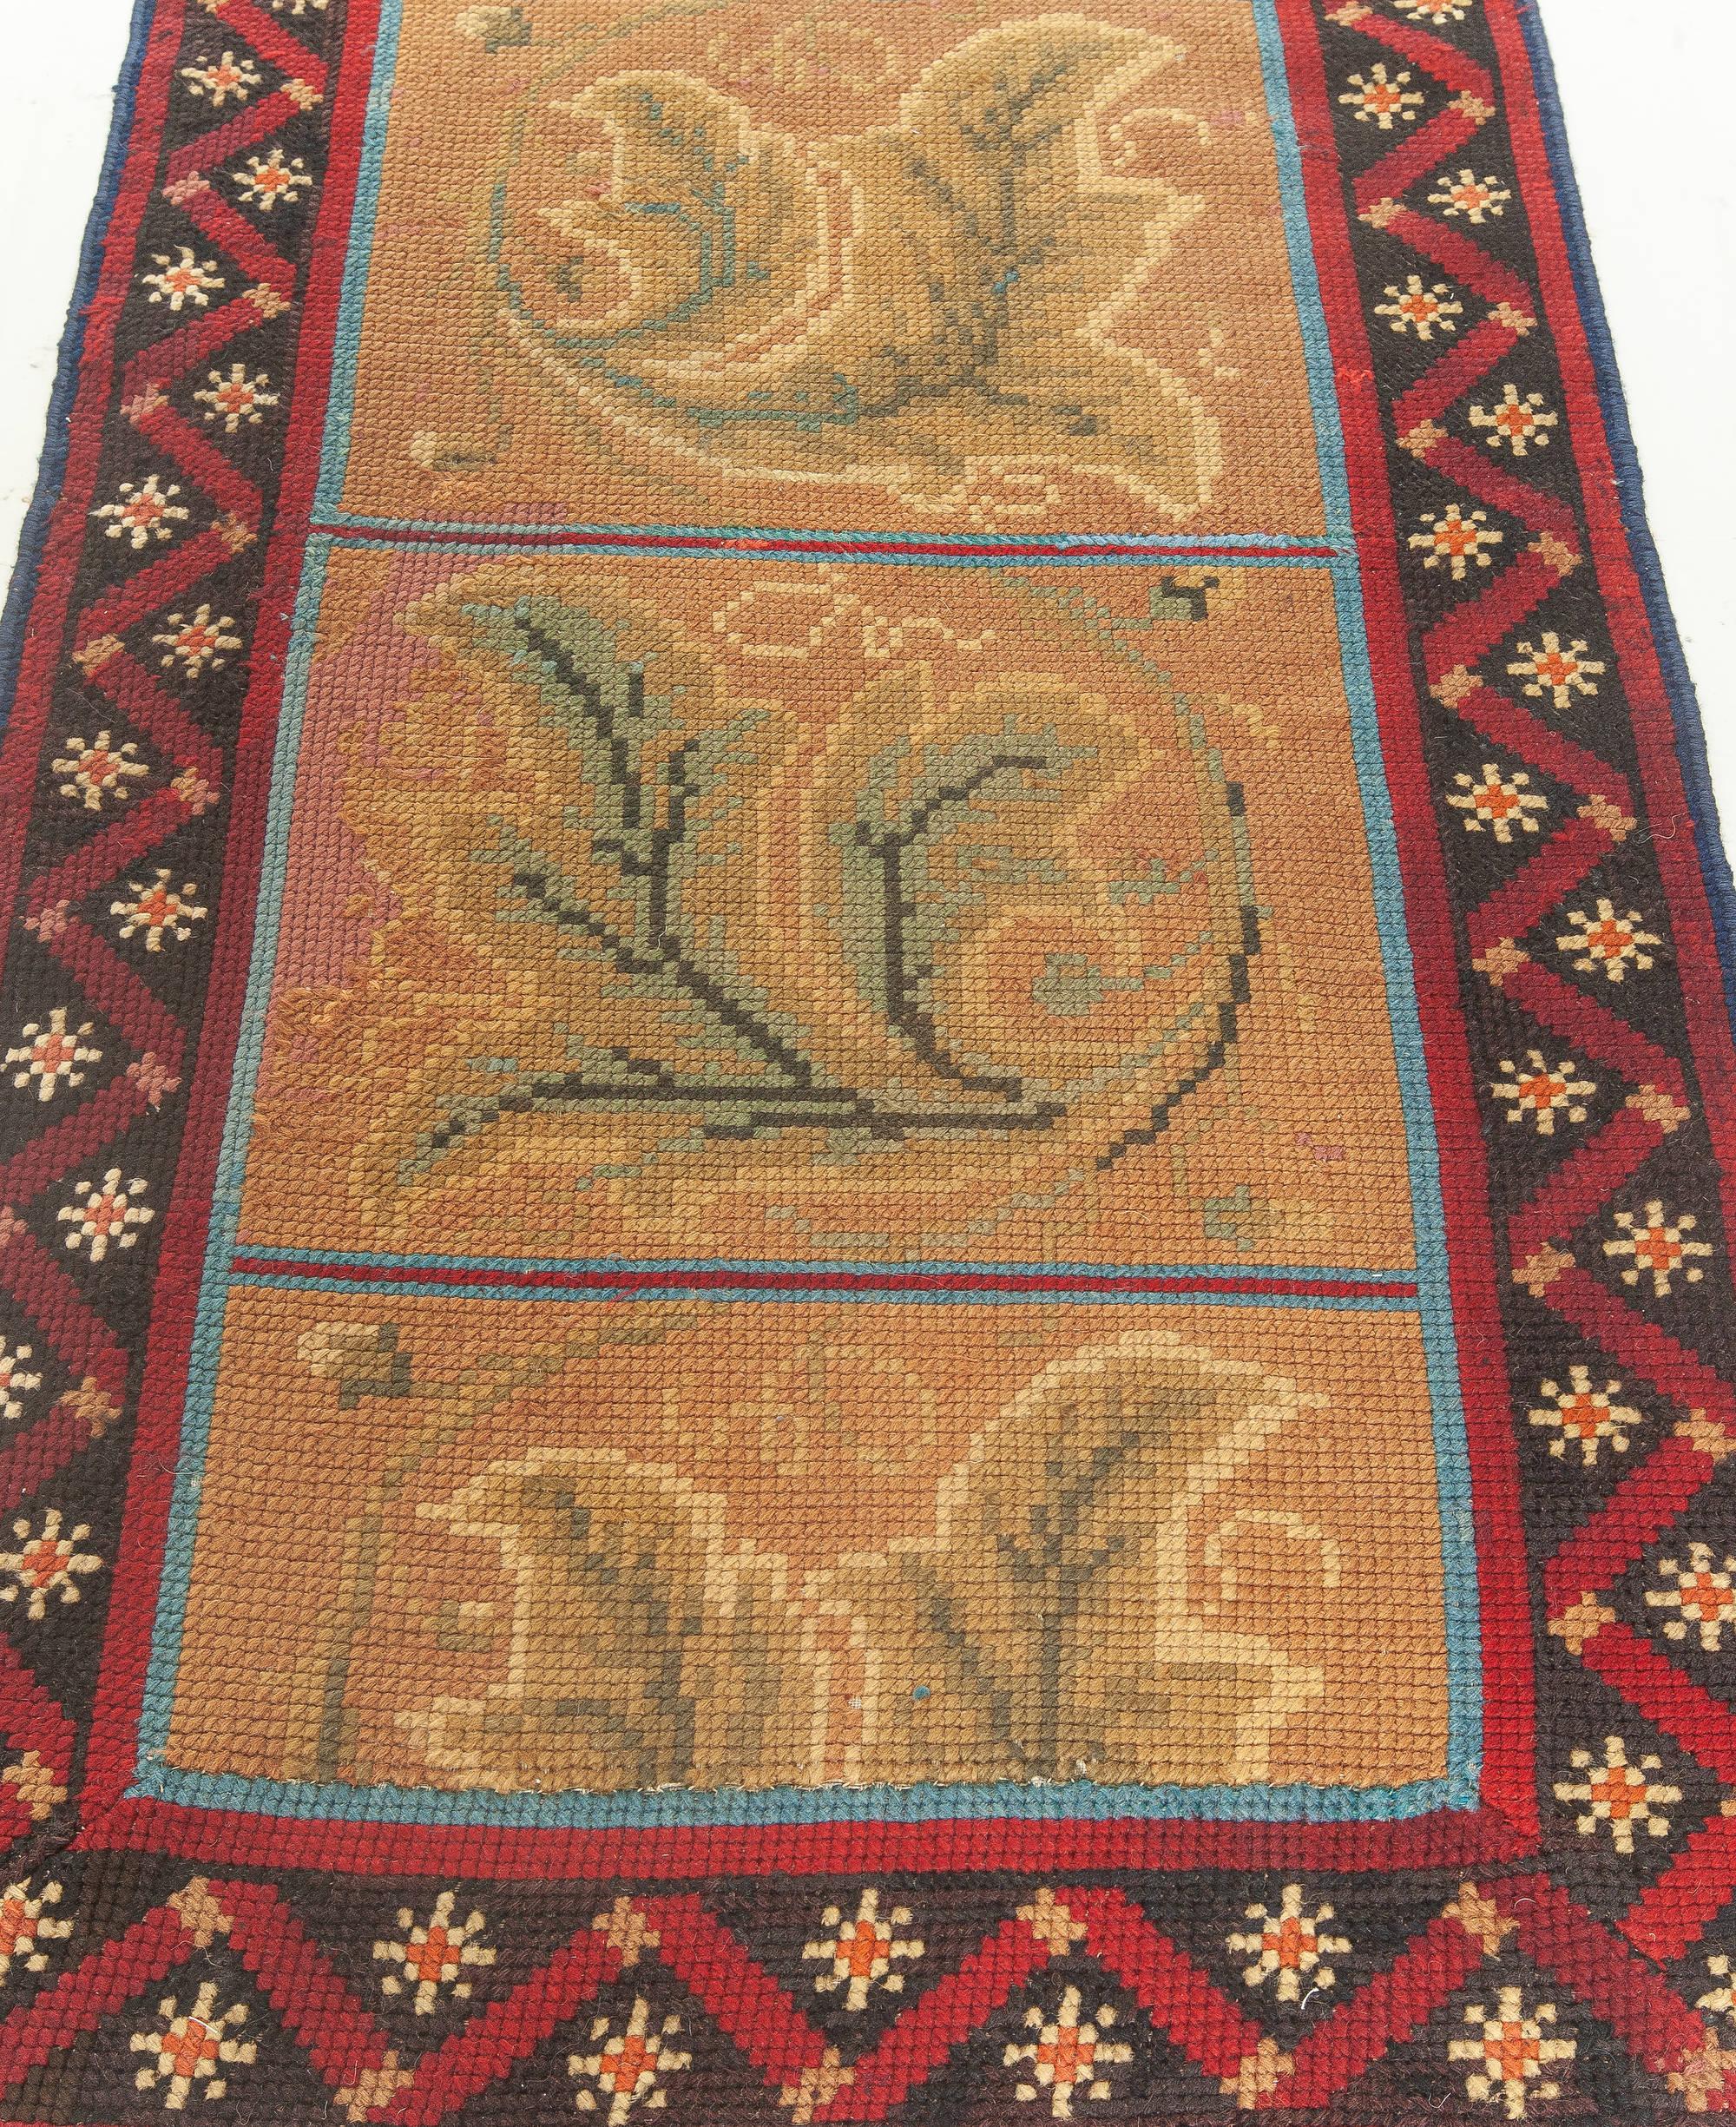 Needlepoint Antique Needle Point Runner For Sale